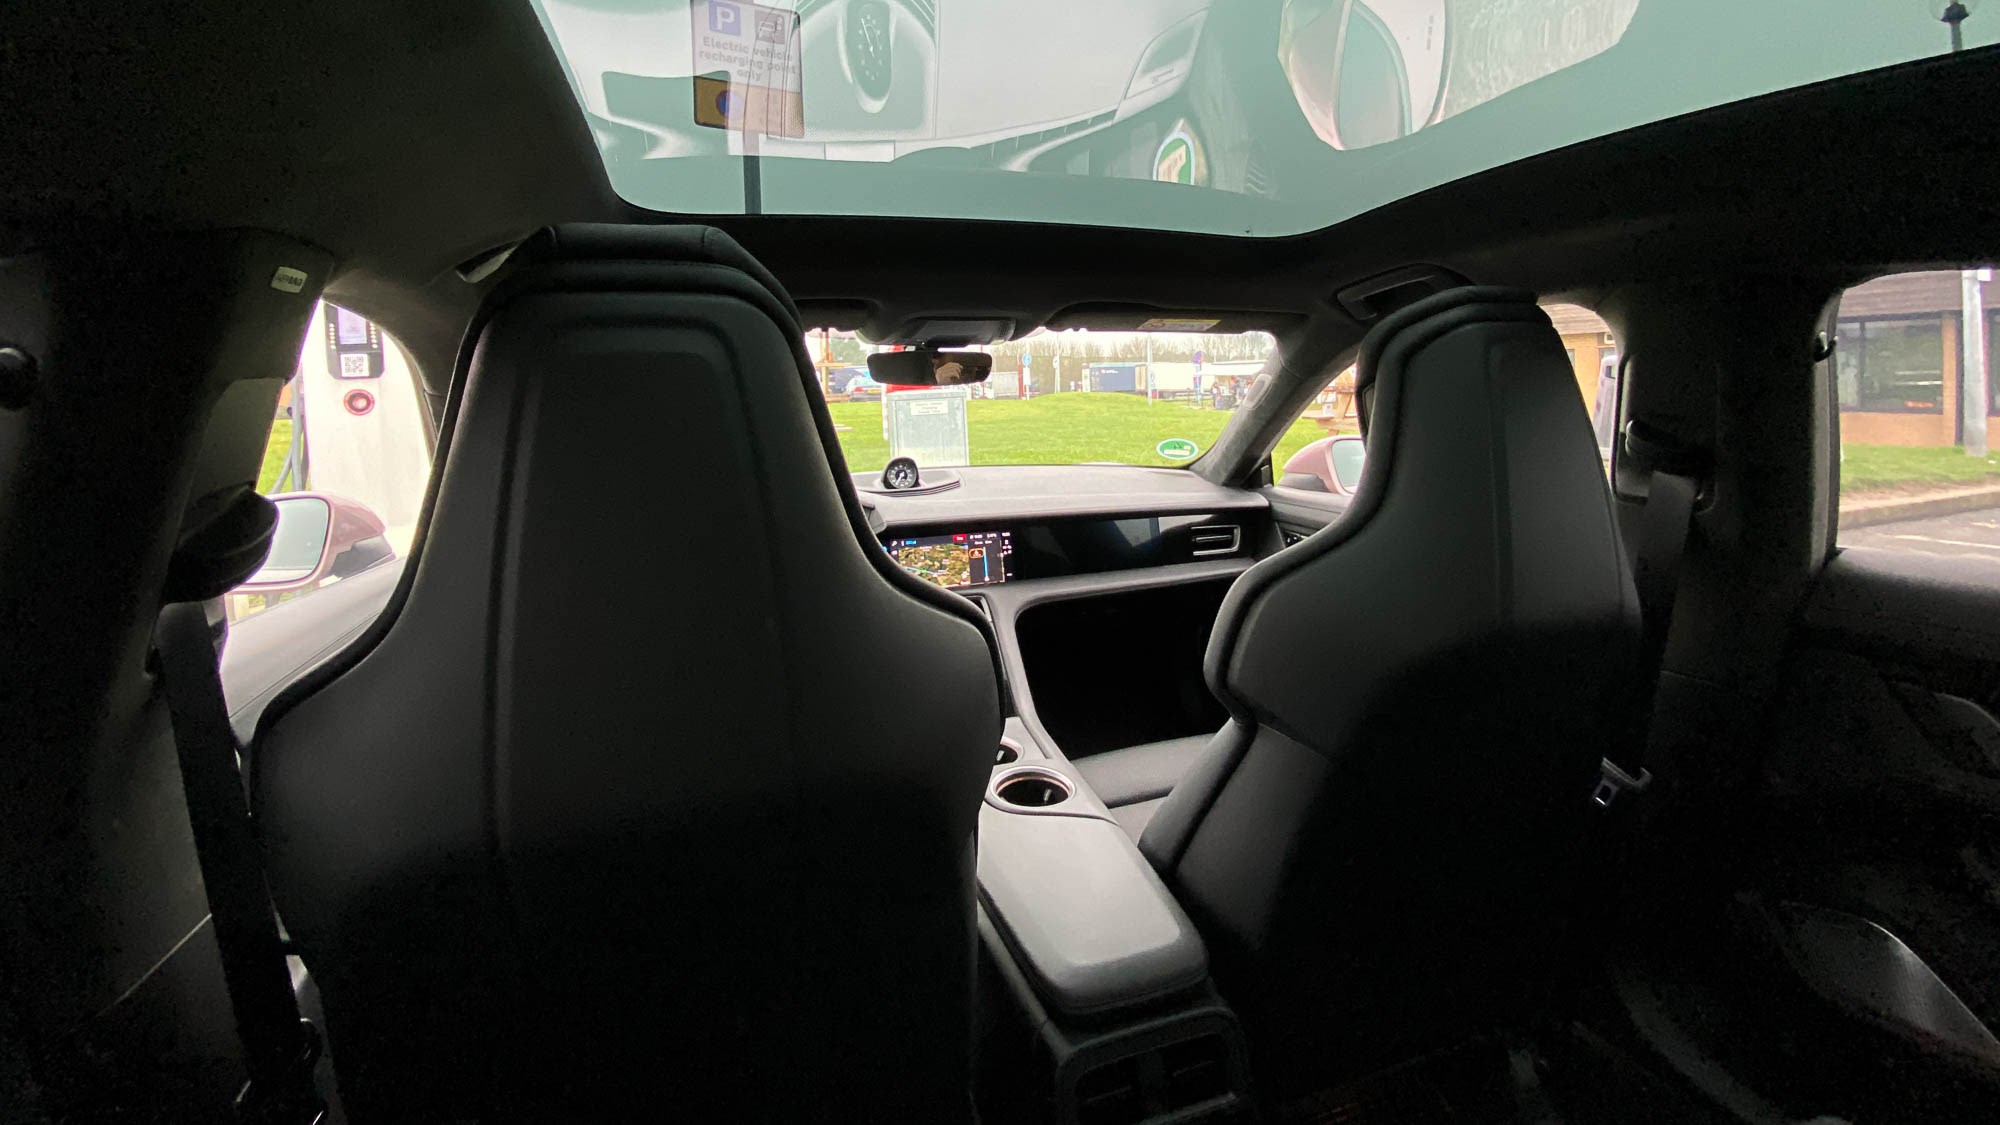 Porsche Taycan rear seats, with panoramic roof - 2021